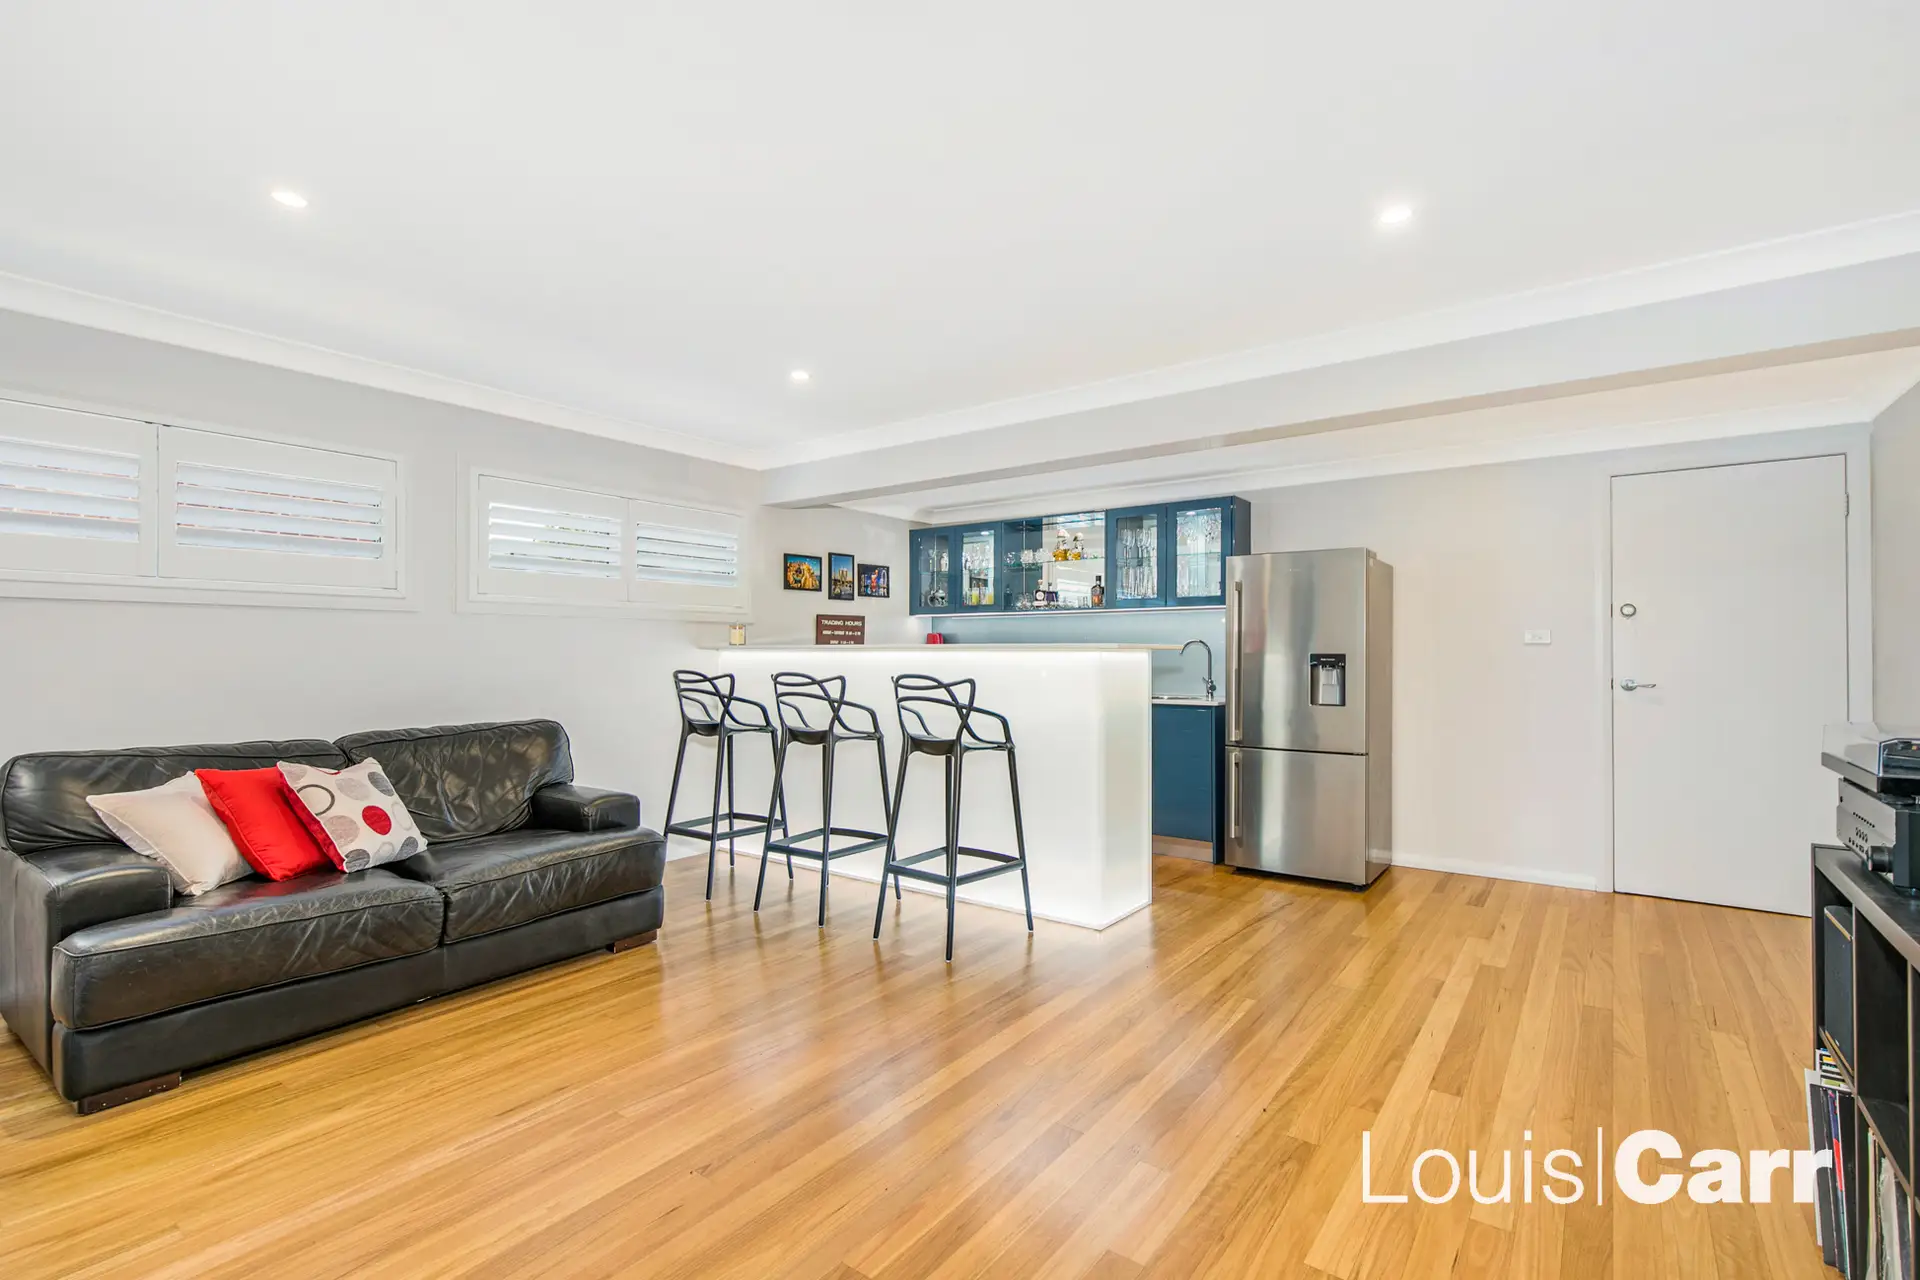 Photo #7: 3 Tunbridge Place, Cherrybrook - Sold by Louis Carr Real Estate